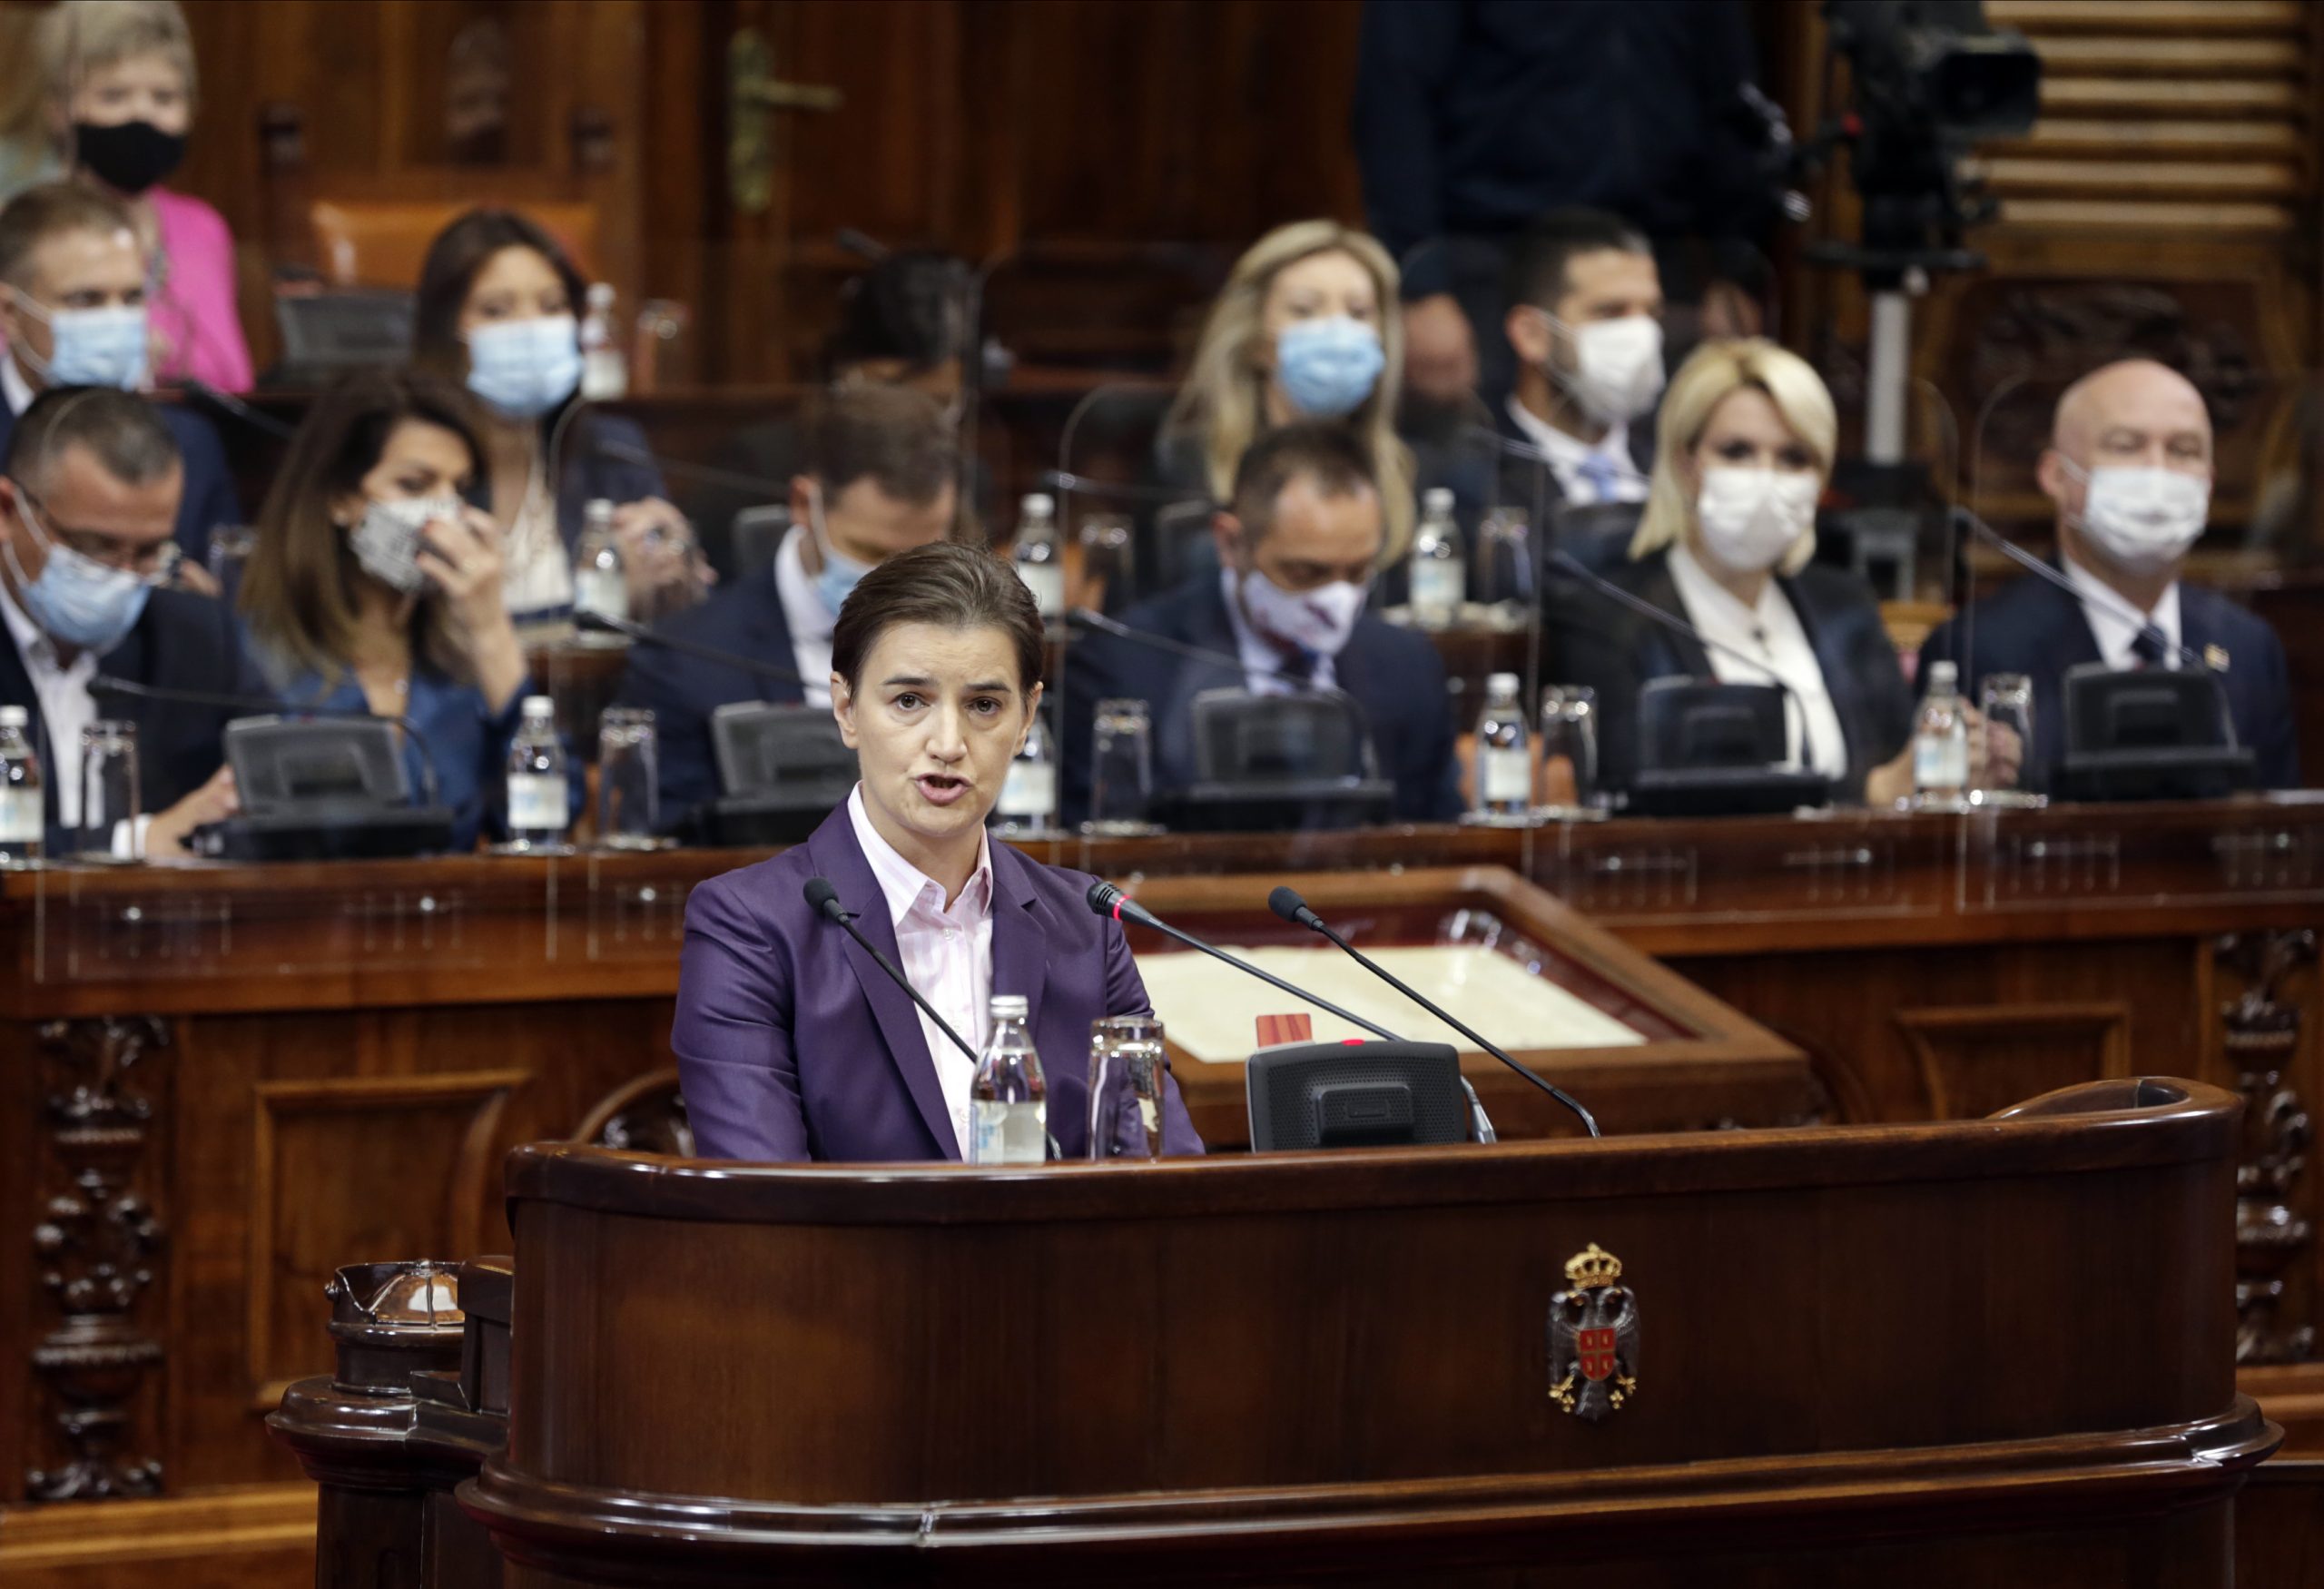 epa08779966 Prime Minister-designate Ana Brnabic delivers her plan for a new government to members of parliament in Belgrade, Serbia, 28 October 2020. After the parliamentary elections on 21 June 2020, the ruling Serbian Progressive Party (SNS) won the political mandate taking 180 out of the 250 seats in the parliament.  EPA/Andrej Cukic